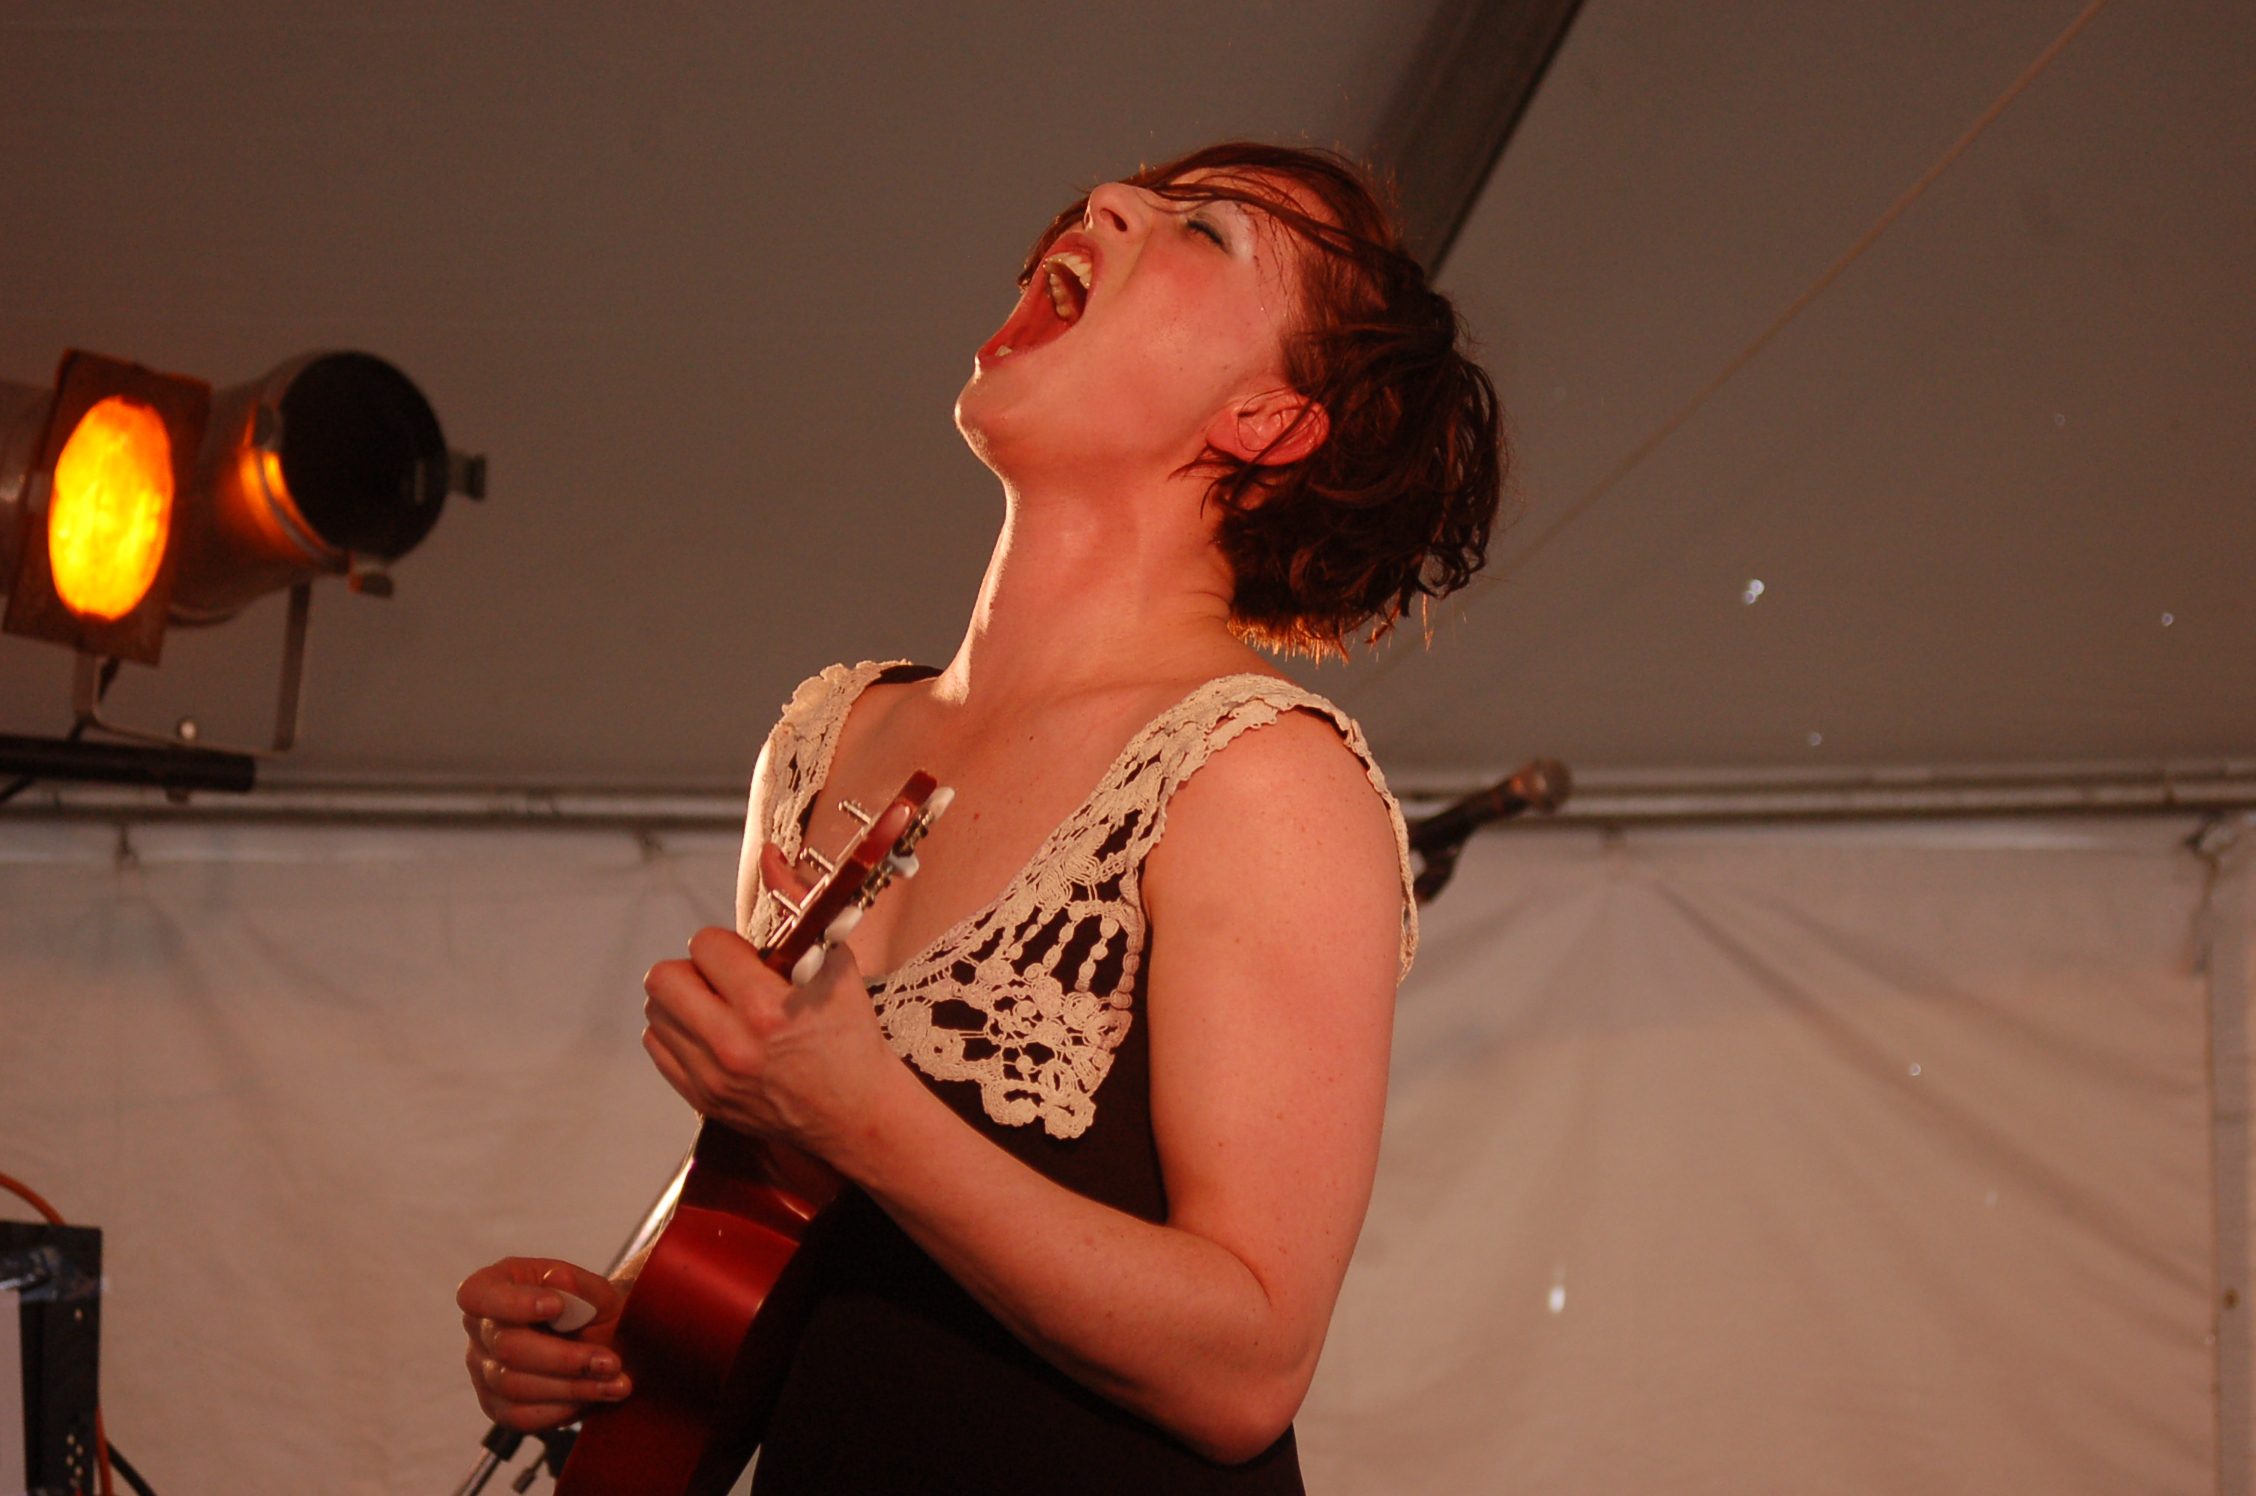 Amanda Palmer Releases New Song “Small Hands, Small Heart” On "Live Things"